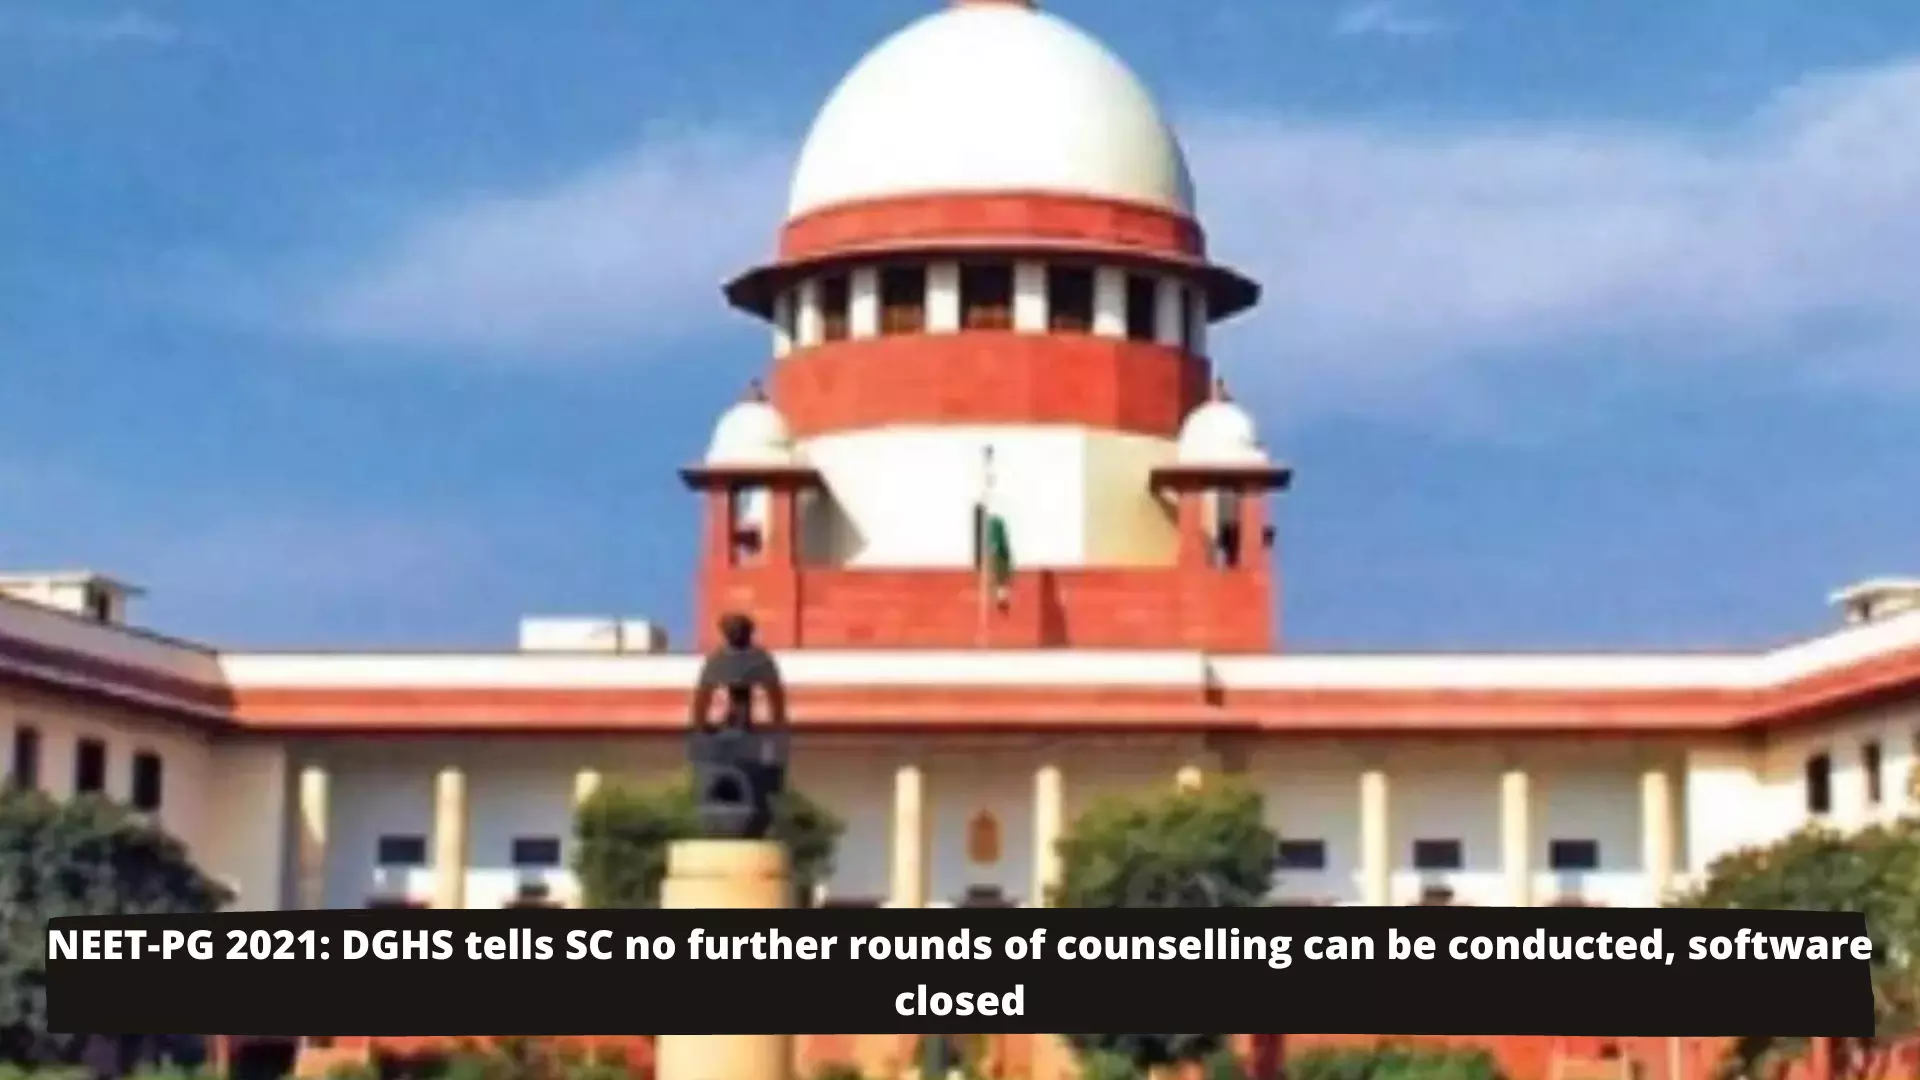 DGHS tells SC no further rounds of NEET PG 2021 counselling can be conducted, software closed